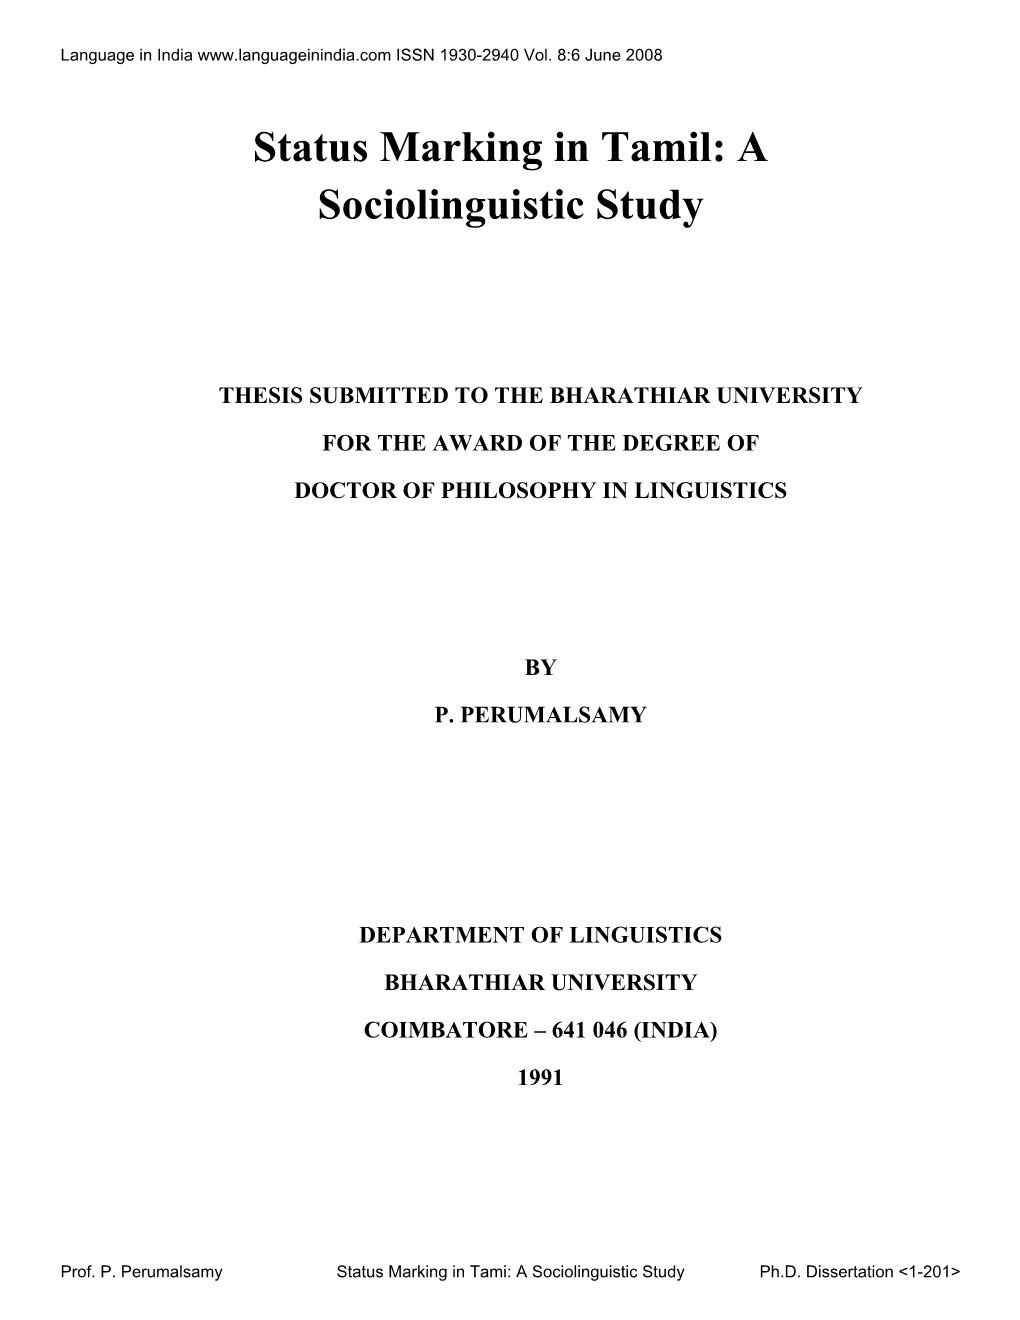 Status Marking in Tamil: a Sociolinguistic Study